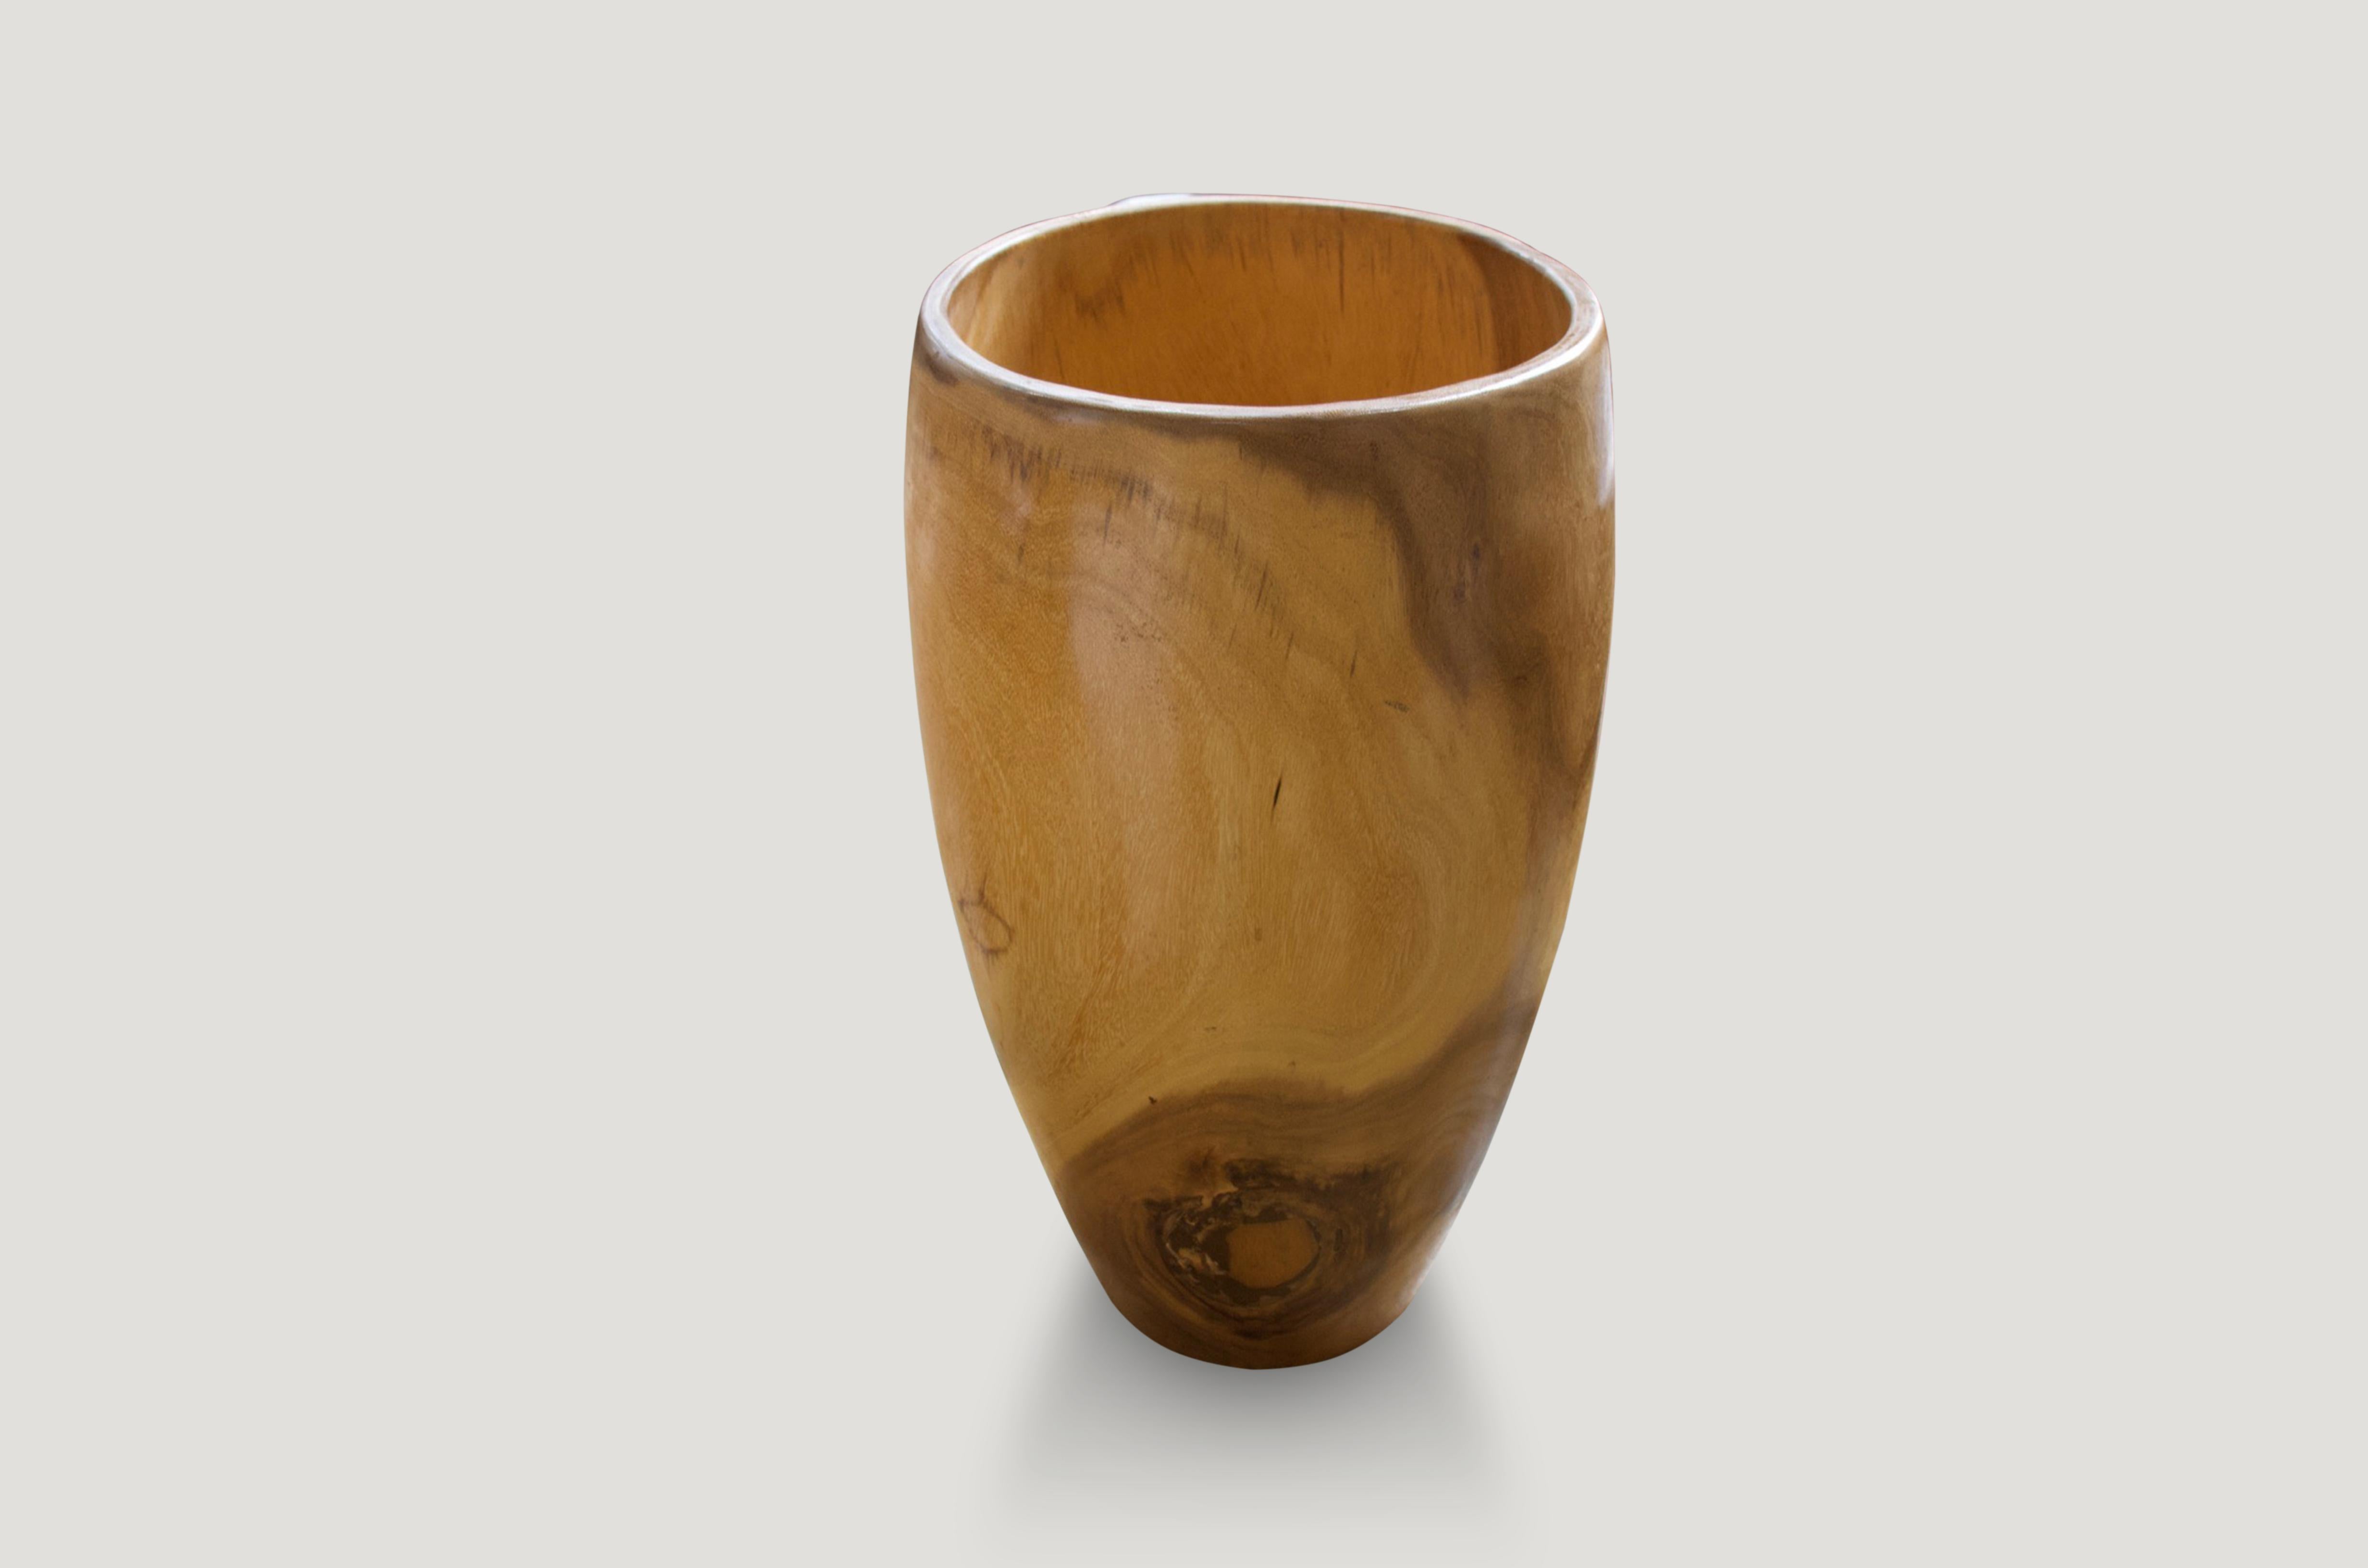 Hollowed out drum container in natural palm wood. Great as a sculptural art piece or umbrella holder. Measures: 28